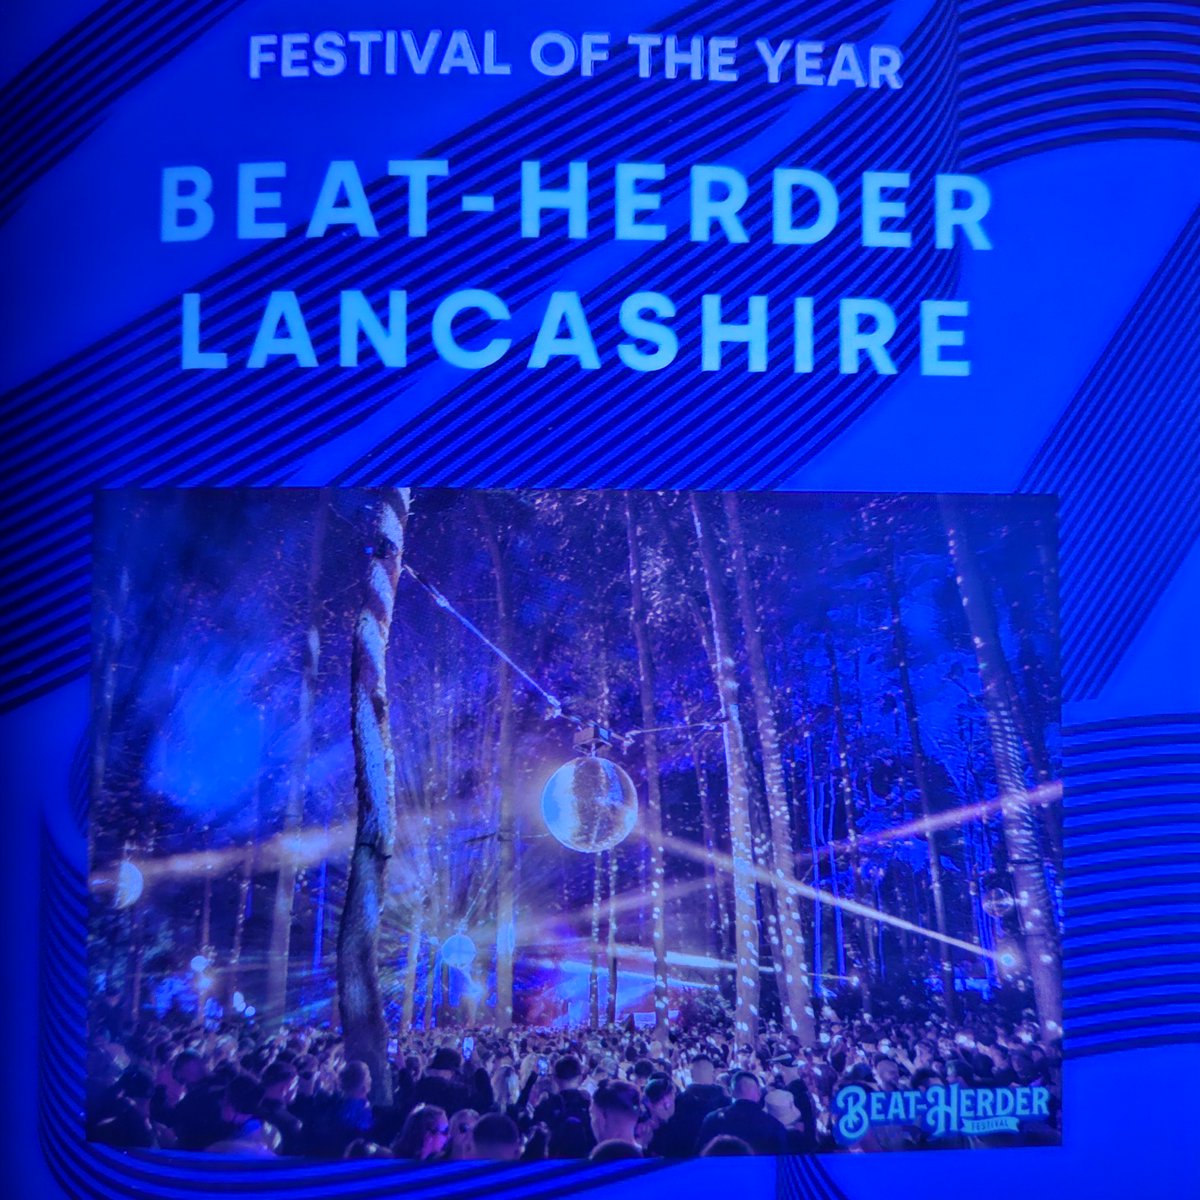 WINNERS!!! WOOP WOOP @Beatherder has just been crowned FESTIVAL OF THE YEAR in @nordoffrobbins NMA's #NorthernMusicAwards BIG thanks and love to everyone that voted for us. 📷